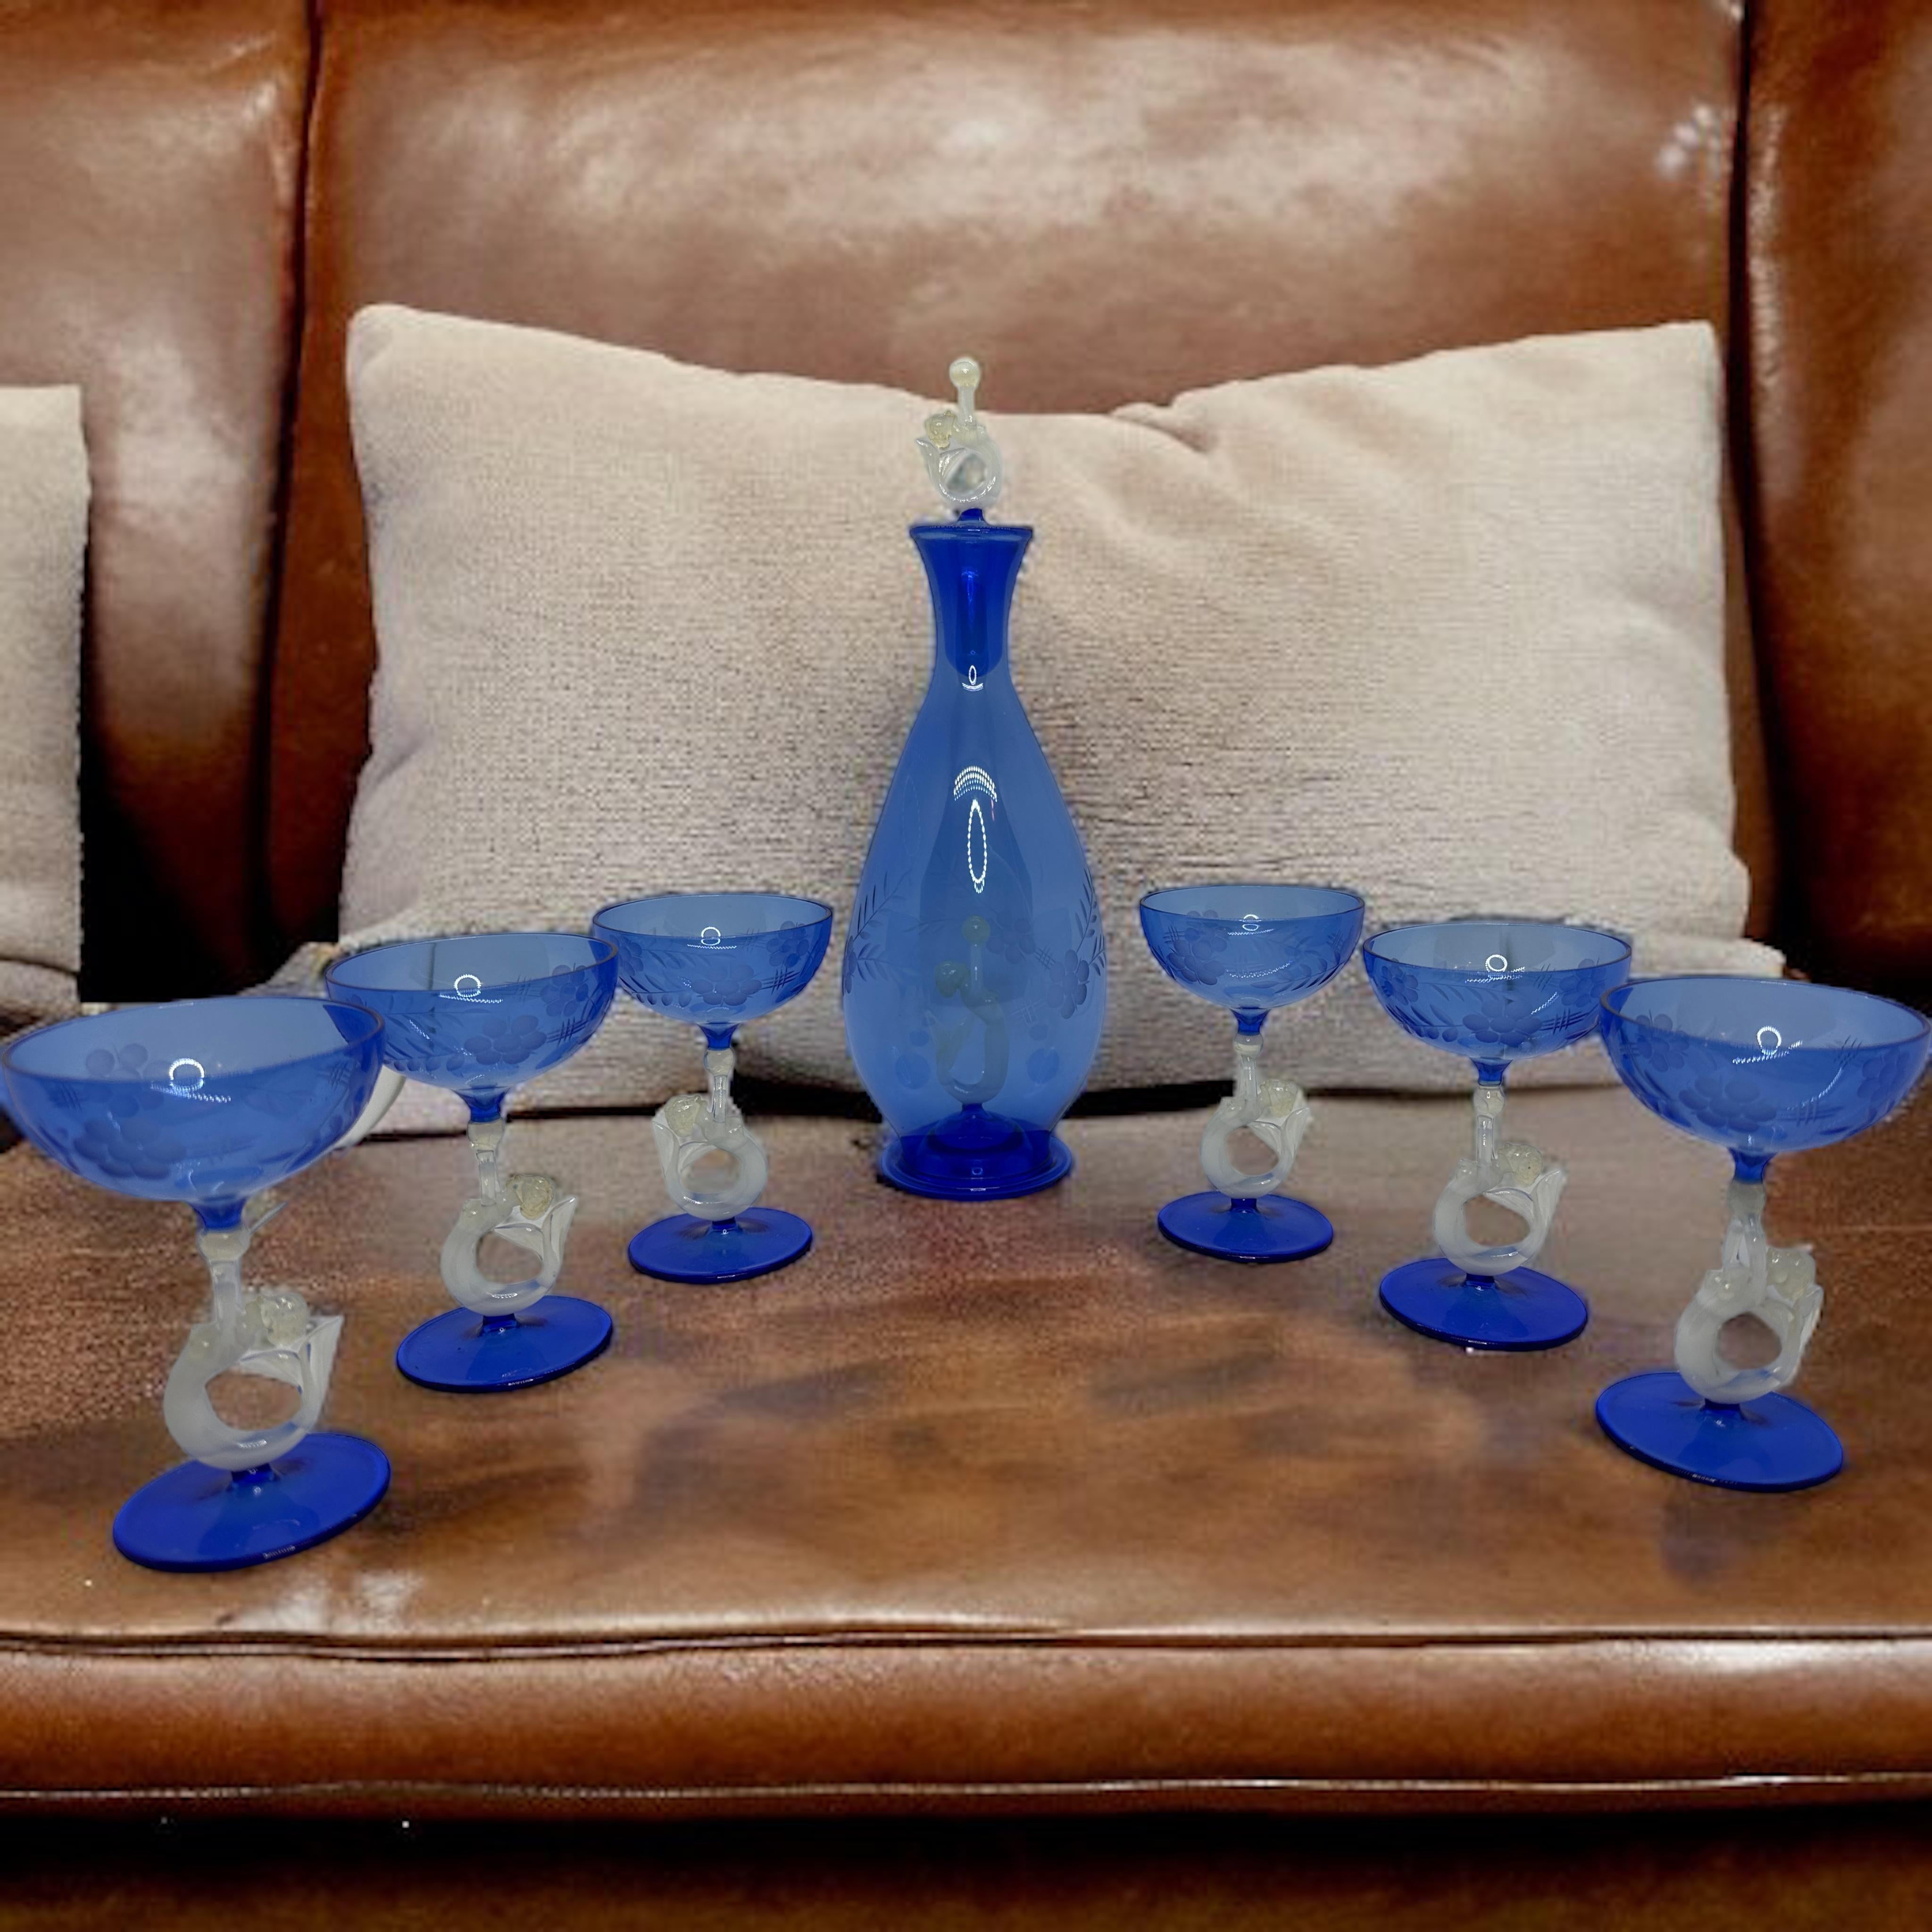 
A slightly cheeky Art Deco decanter set with matching set of six glasses in handblown blue glass, in the style of Bimini. The stems designed as nude mermaid. Very delicate to touch and amazing that something like this last all these years. This